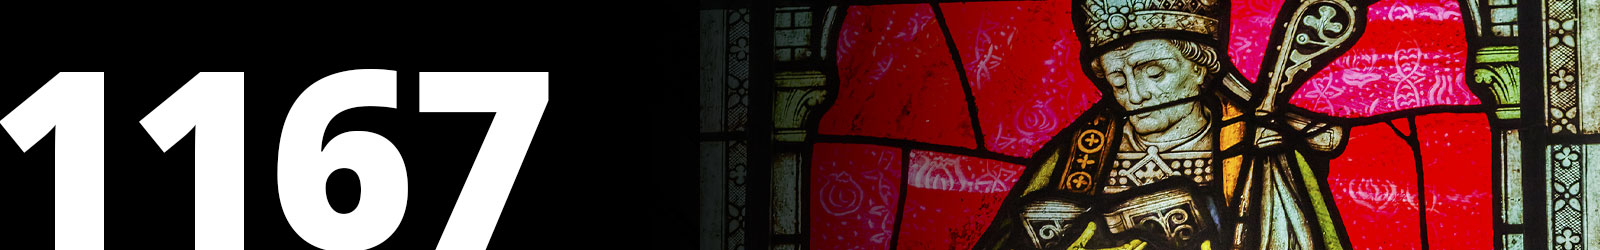 1167 header image for the History timeline depicting Thomas Becket, Archbishop of Canterbury stained glass window in the Chapter House at Westminster Abbey